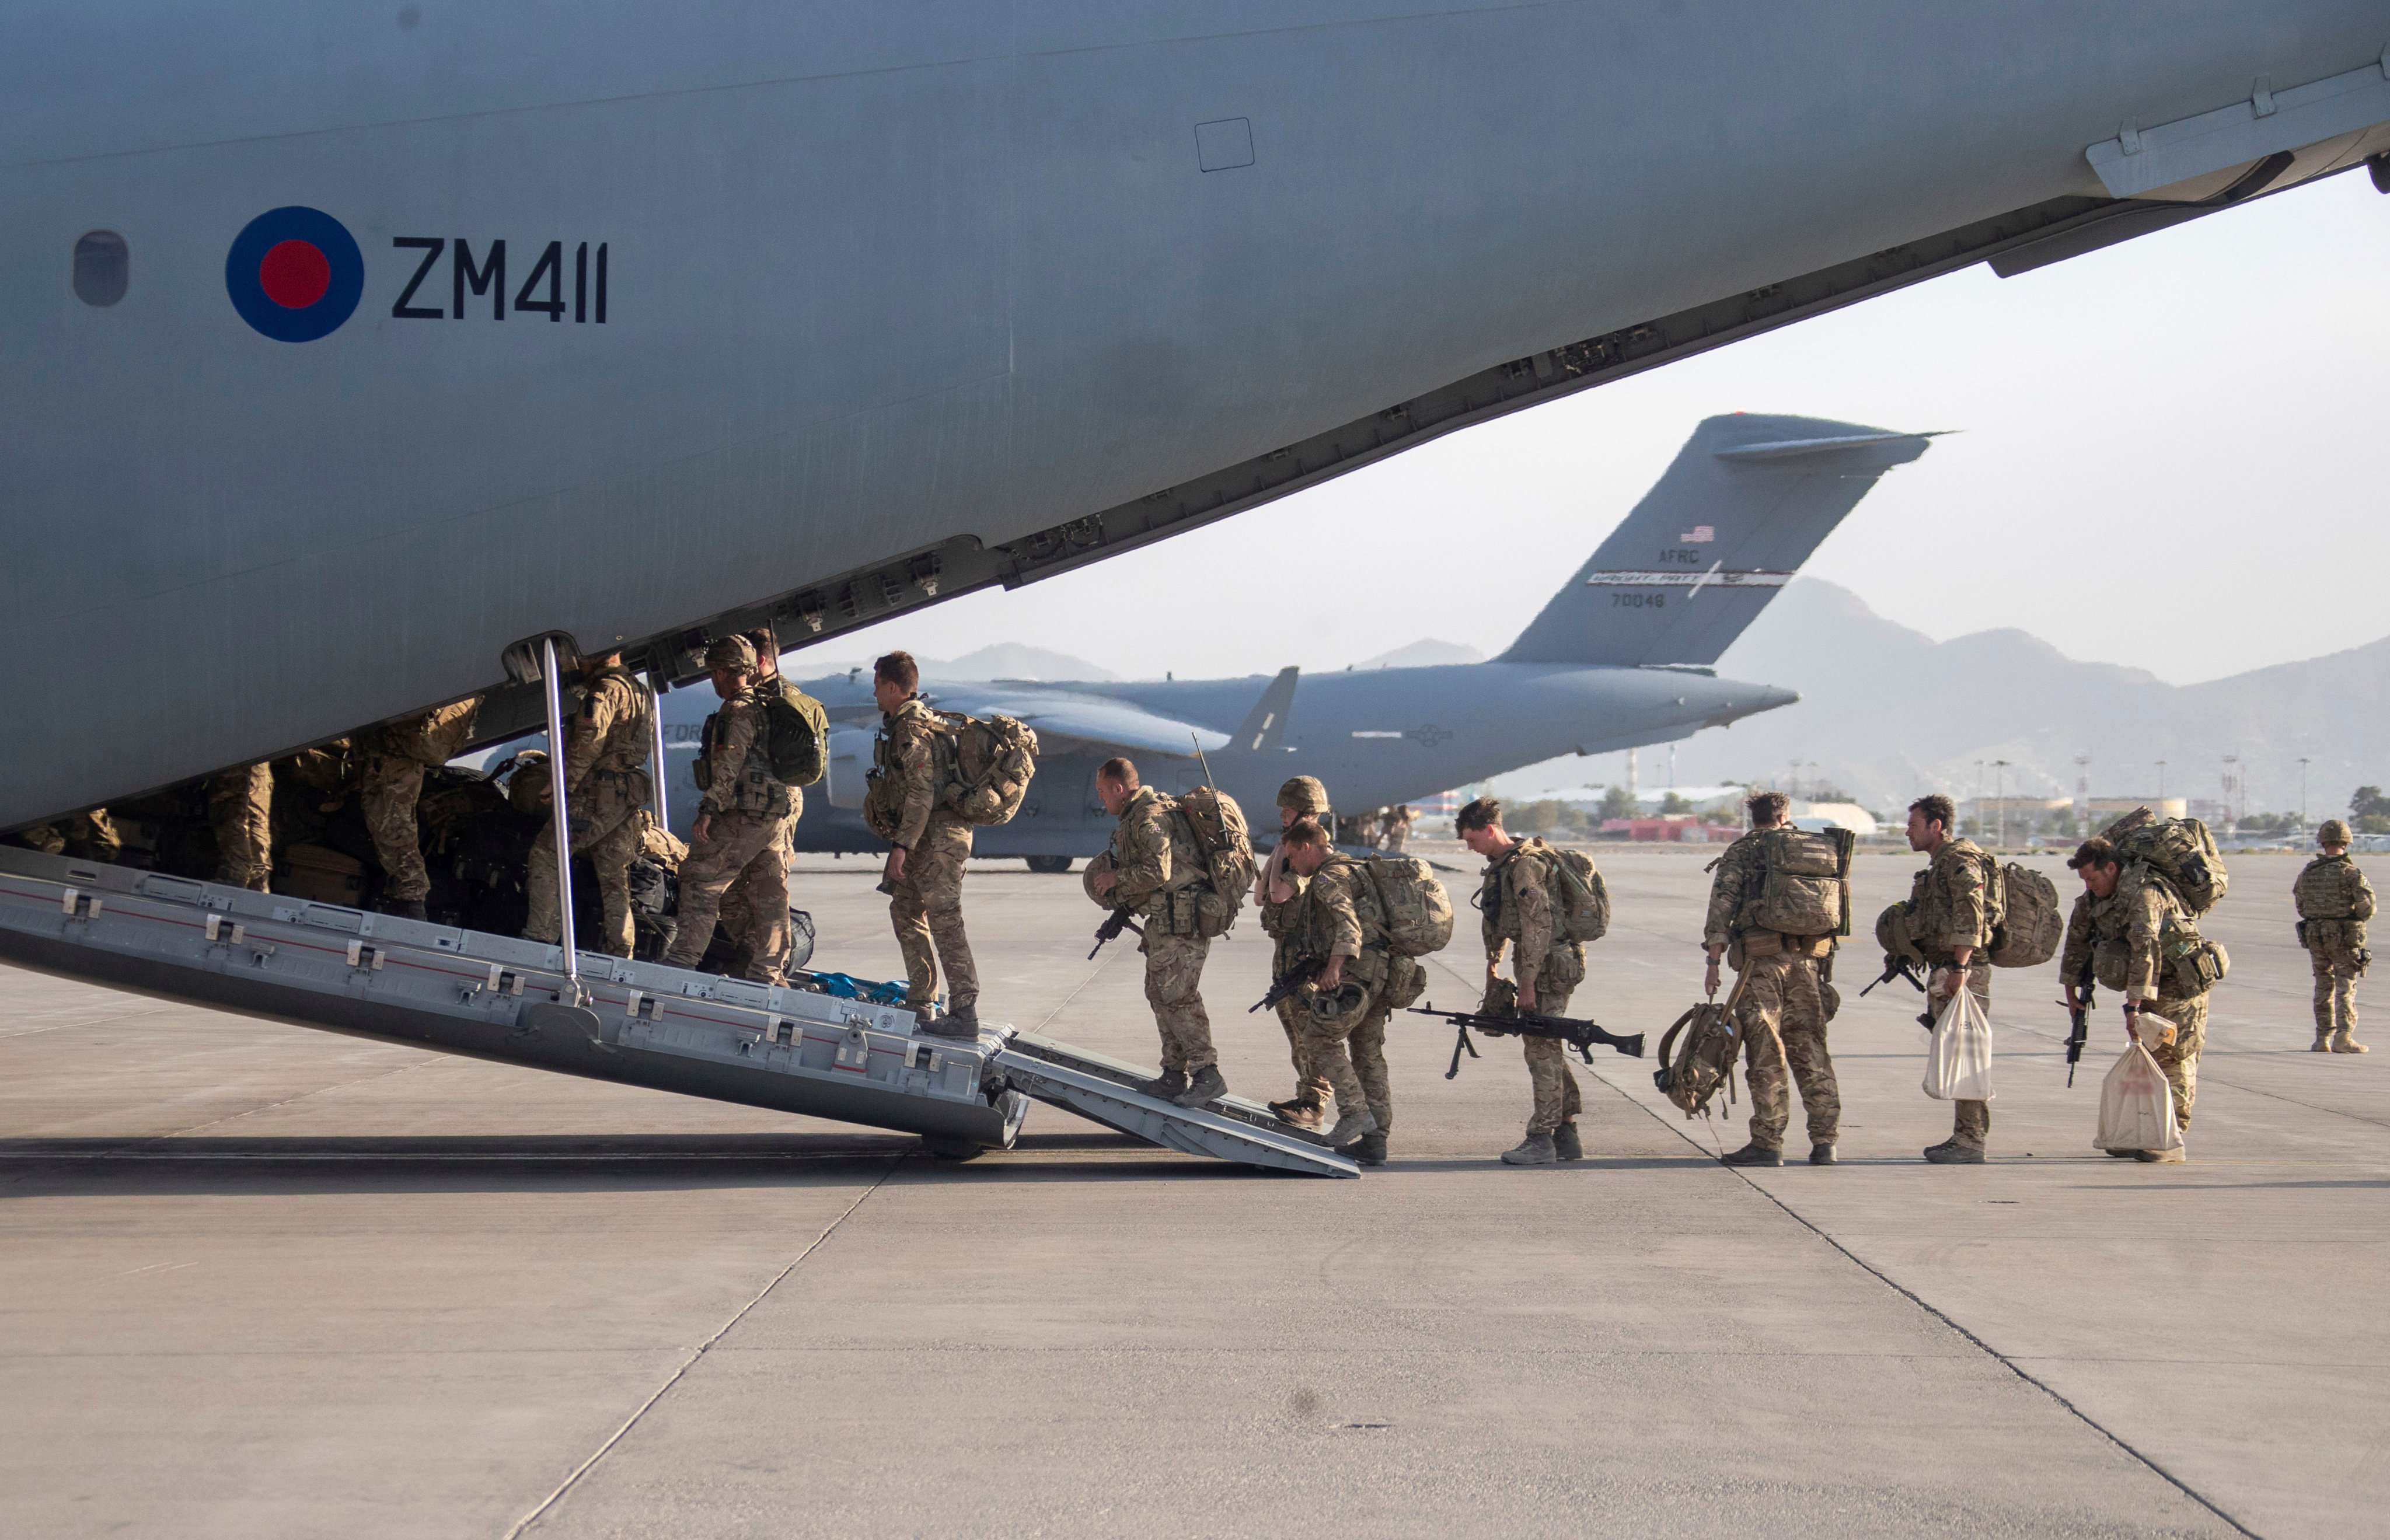 UK military personnel board an aircraft departing Kabul, Afghanistan, in August 2021. Photo: Ministry of Defence via AP